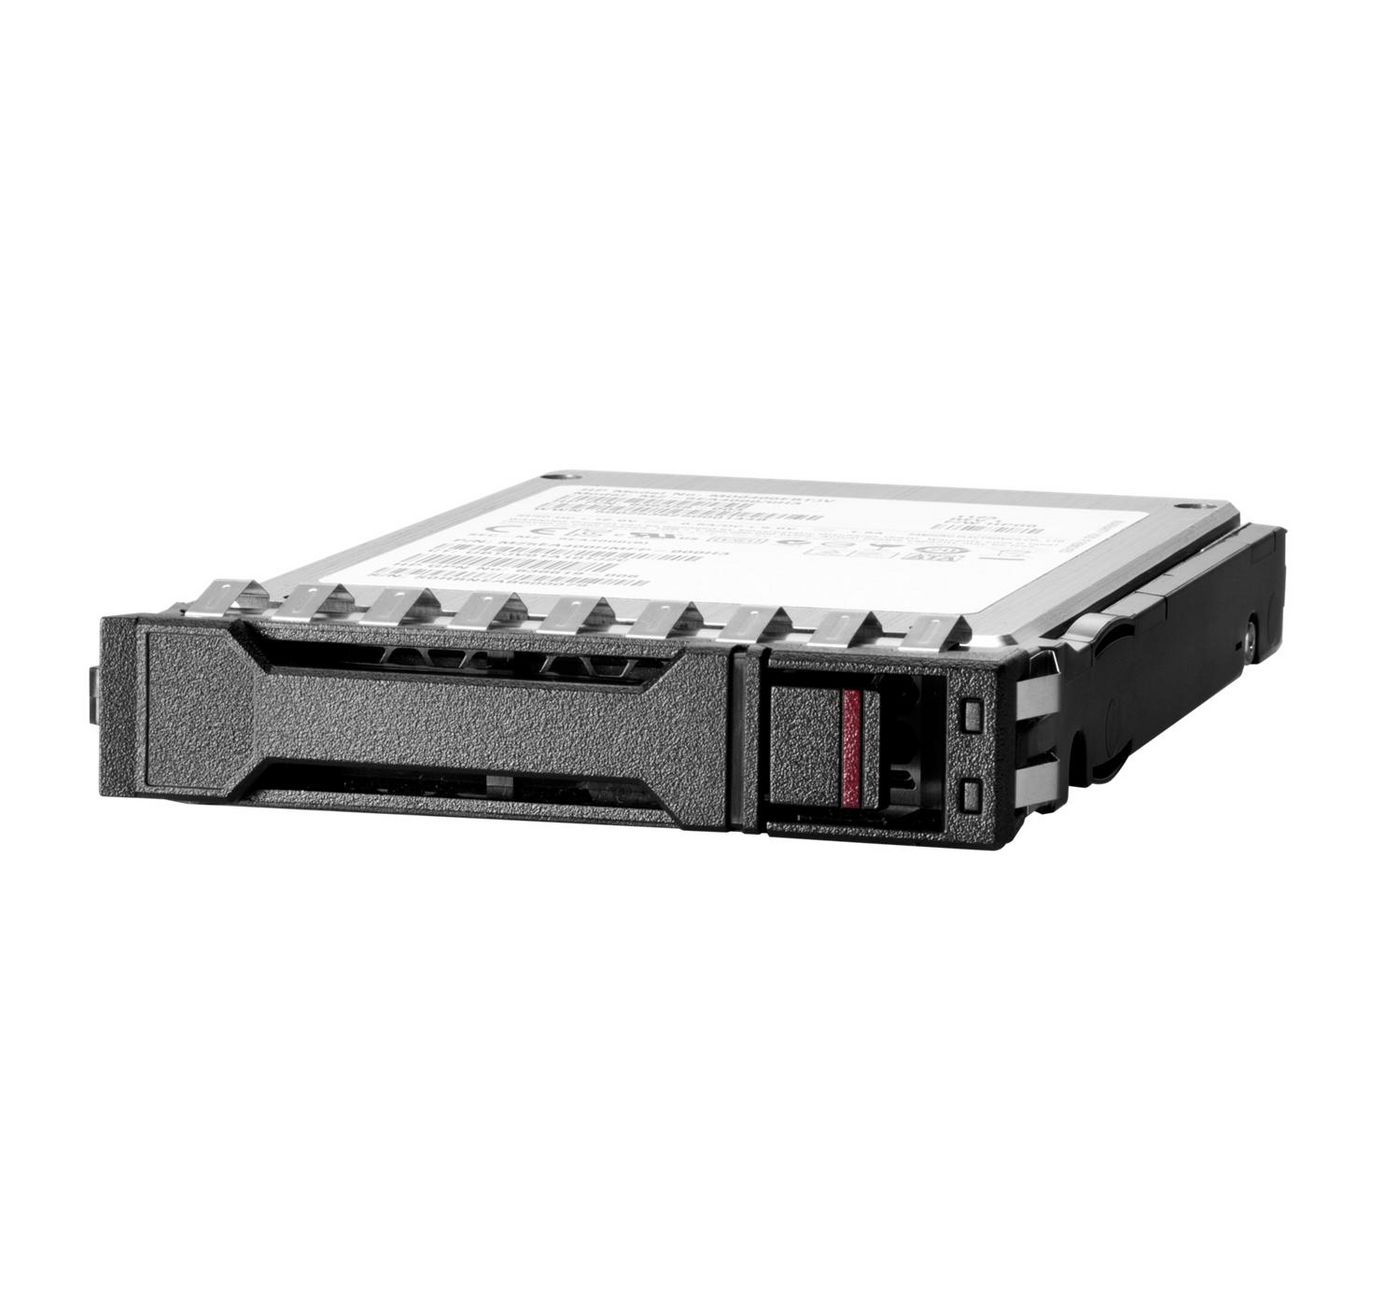 HPE SSD 3,2TB 6,35cm 2,5Zoll NVMe Gen3 Mainstream Performance Mixed Use SFF BC U.3 Static Multi Vend